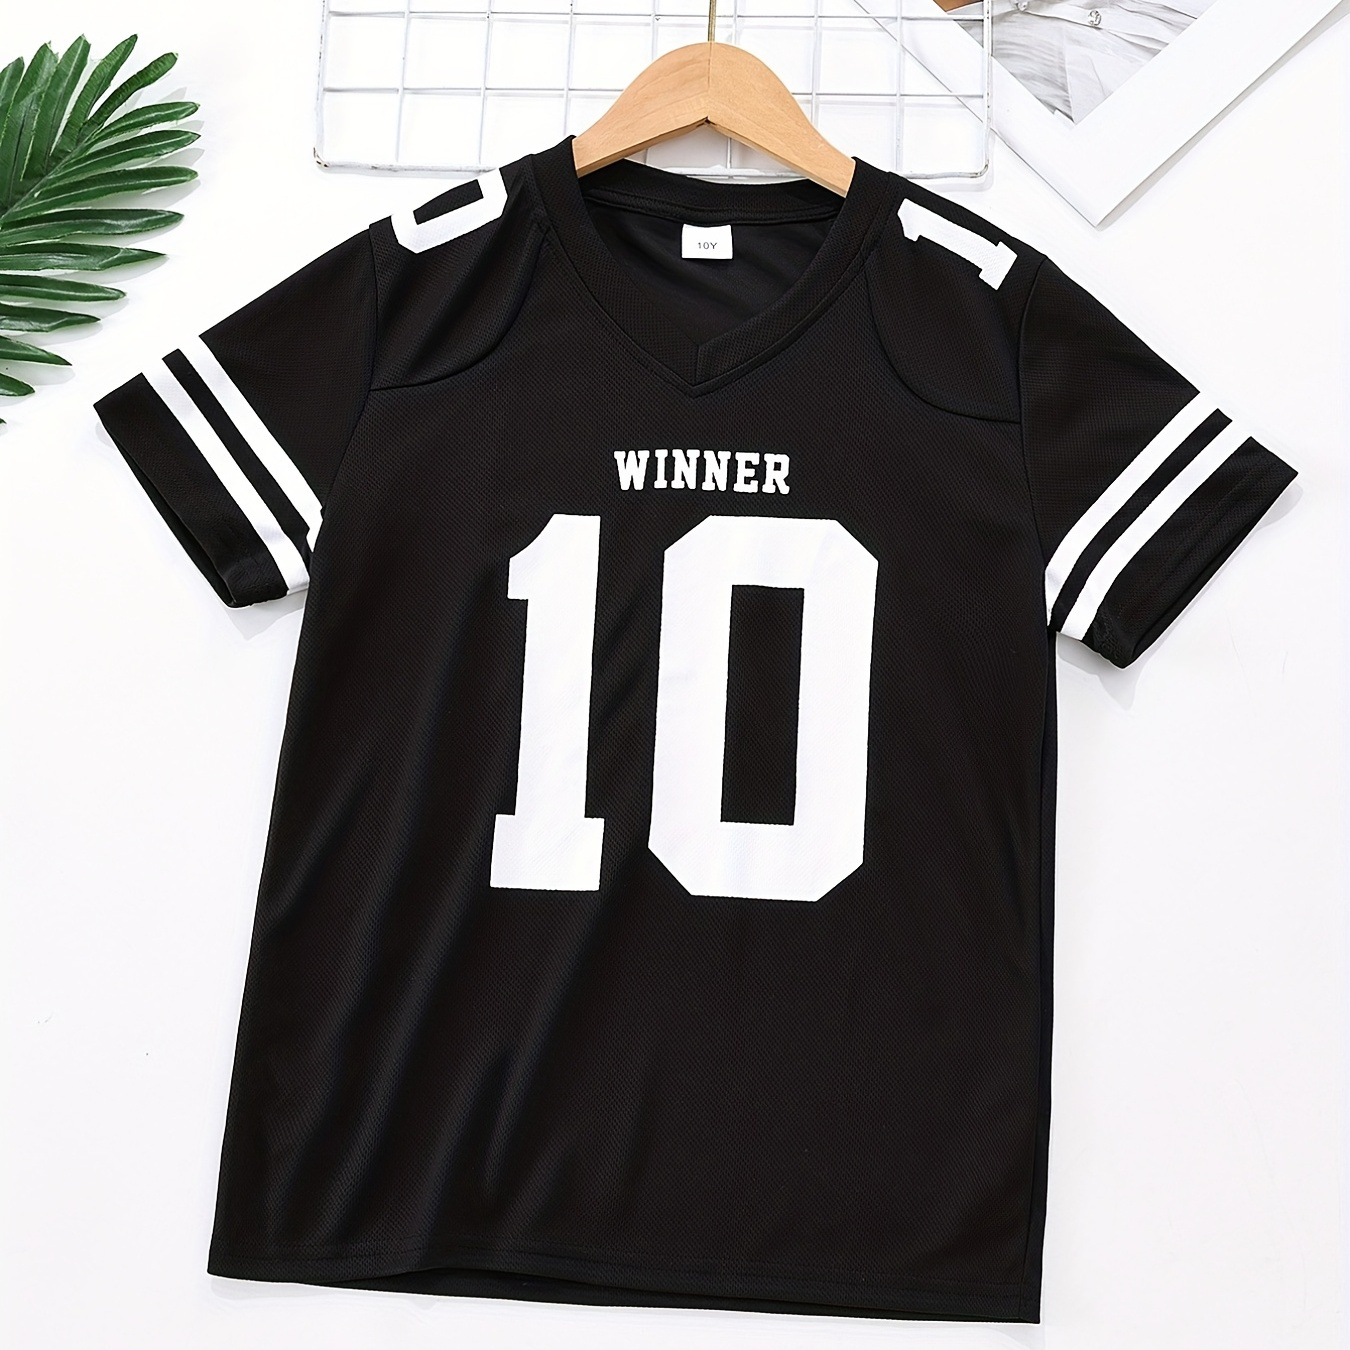 

Boy's T-shirt, Winner Number 10 Print Short Sleeve Top, Casual Sports Outfit, Kids Clothes For Summer